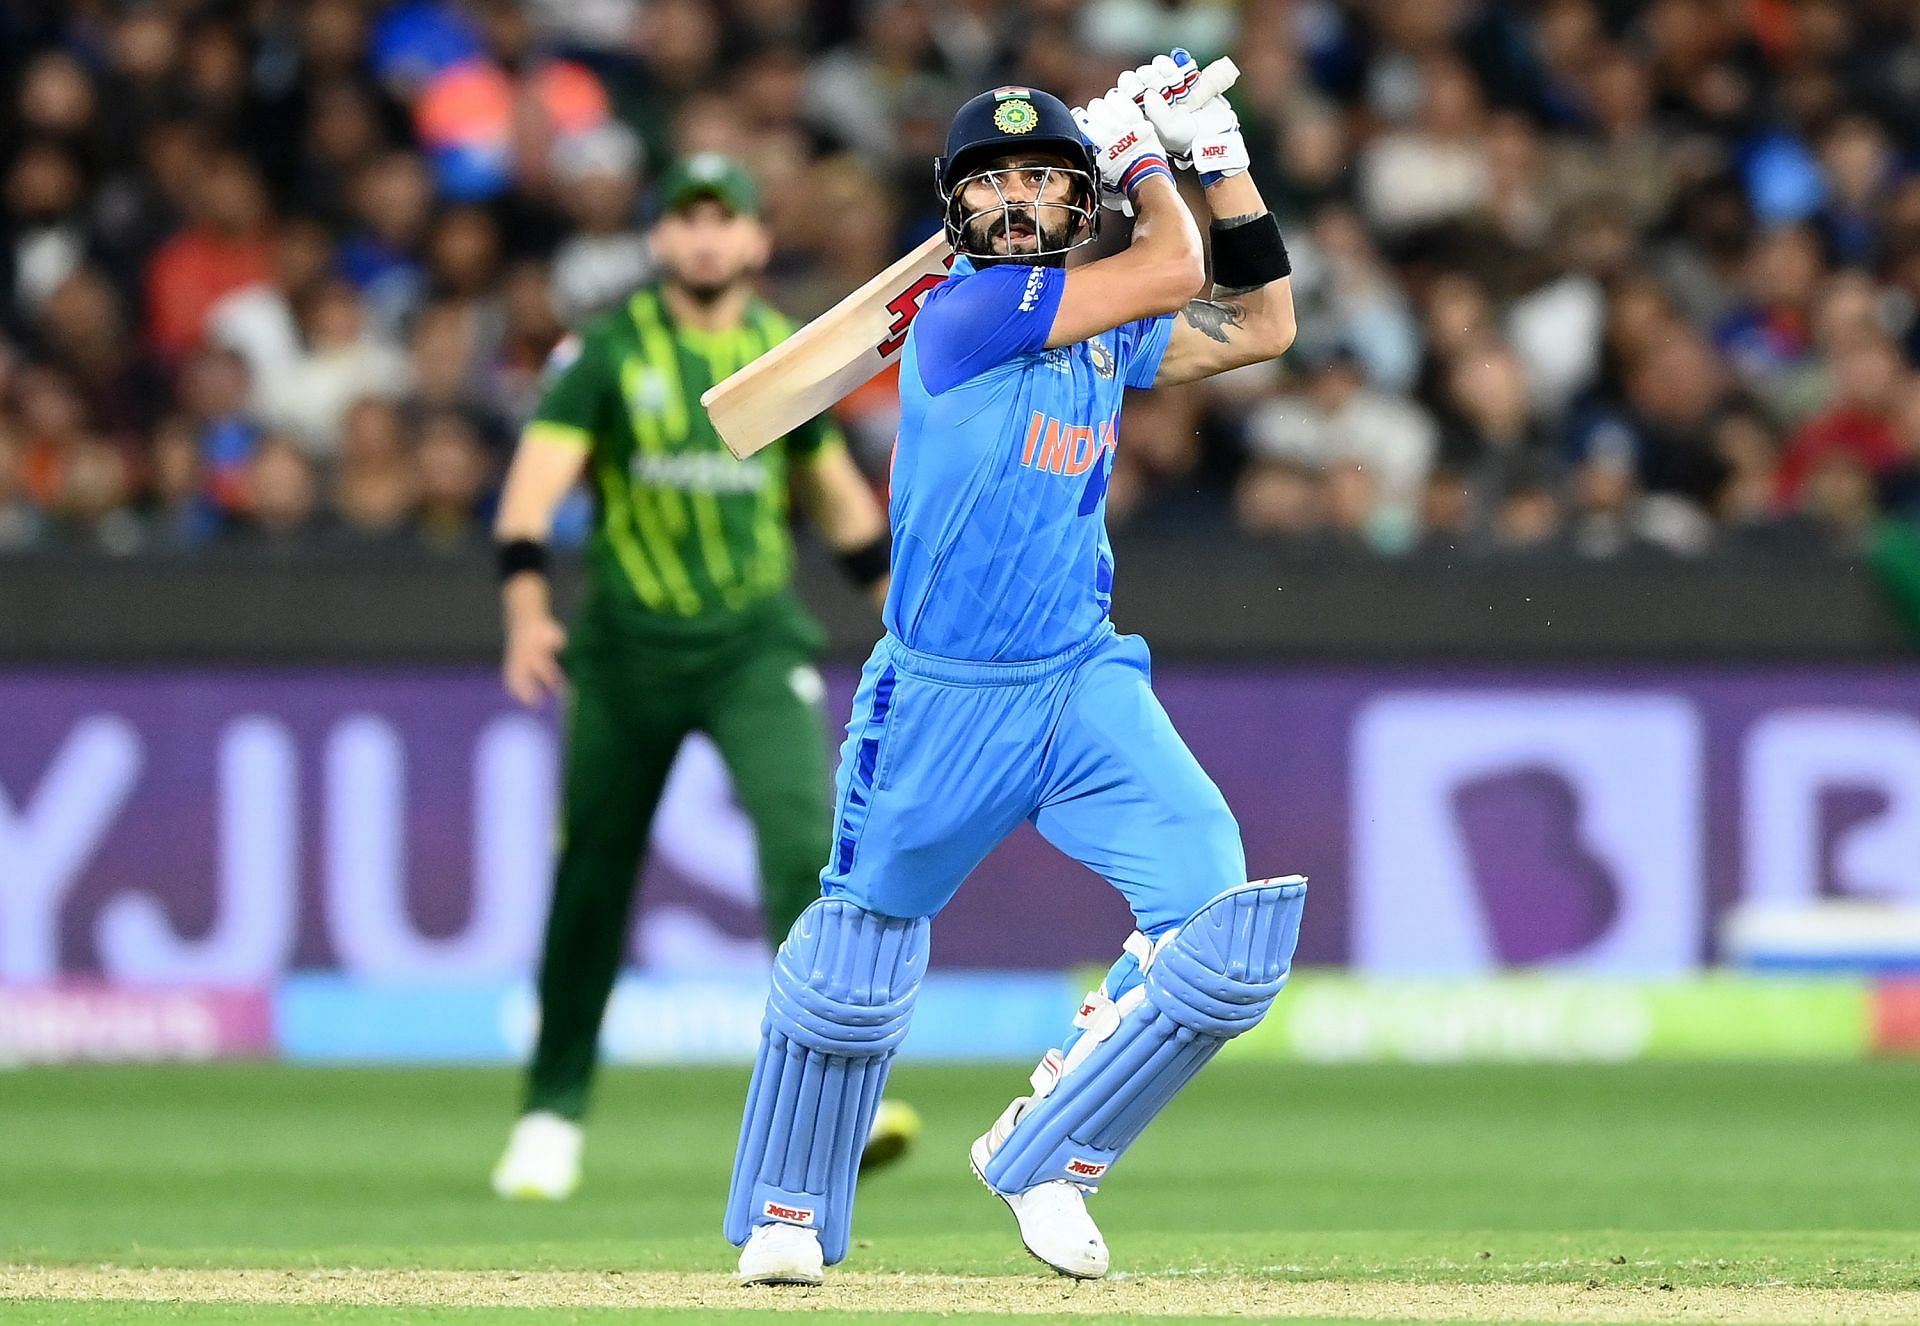 Virat Kohli played a breathtaking knock against Pakistan in the 2022 T20 World Cup. [P/C: Getty]